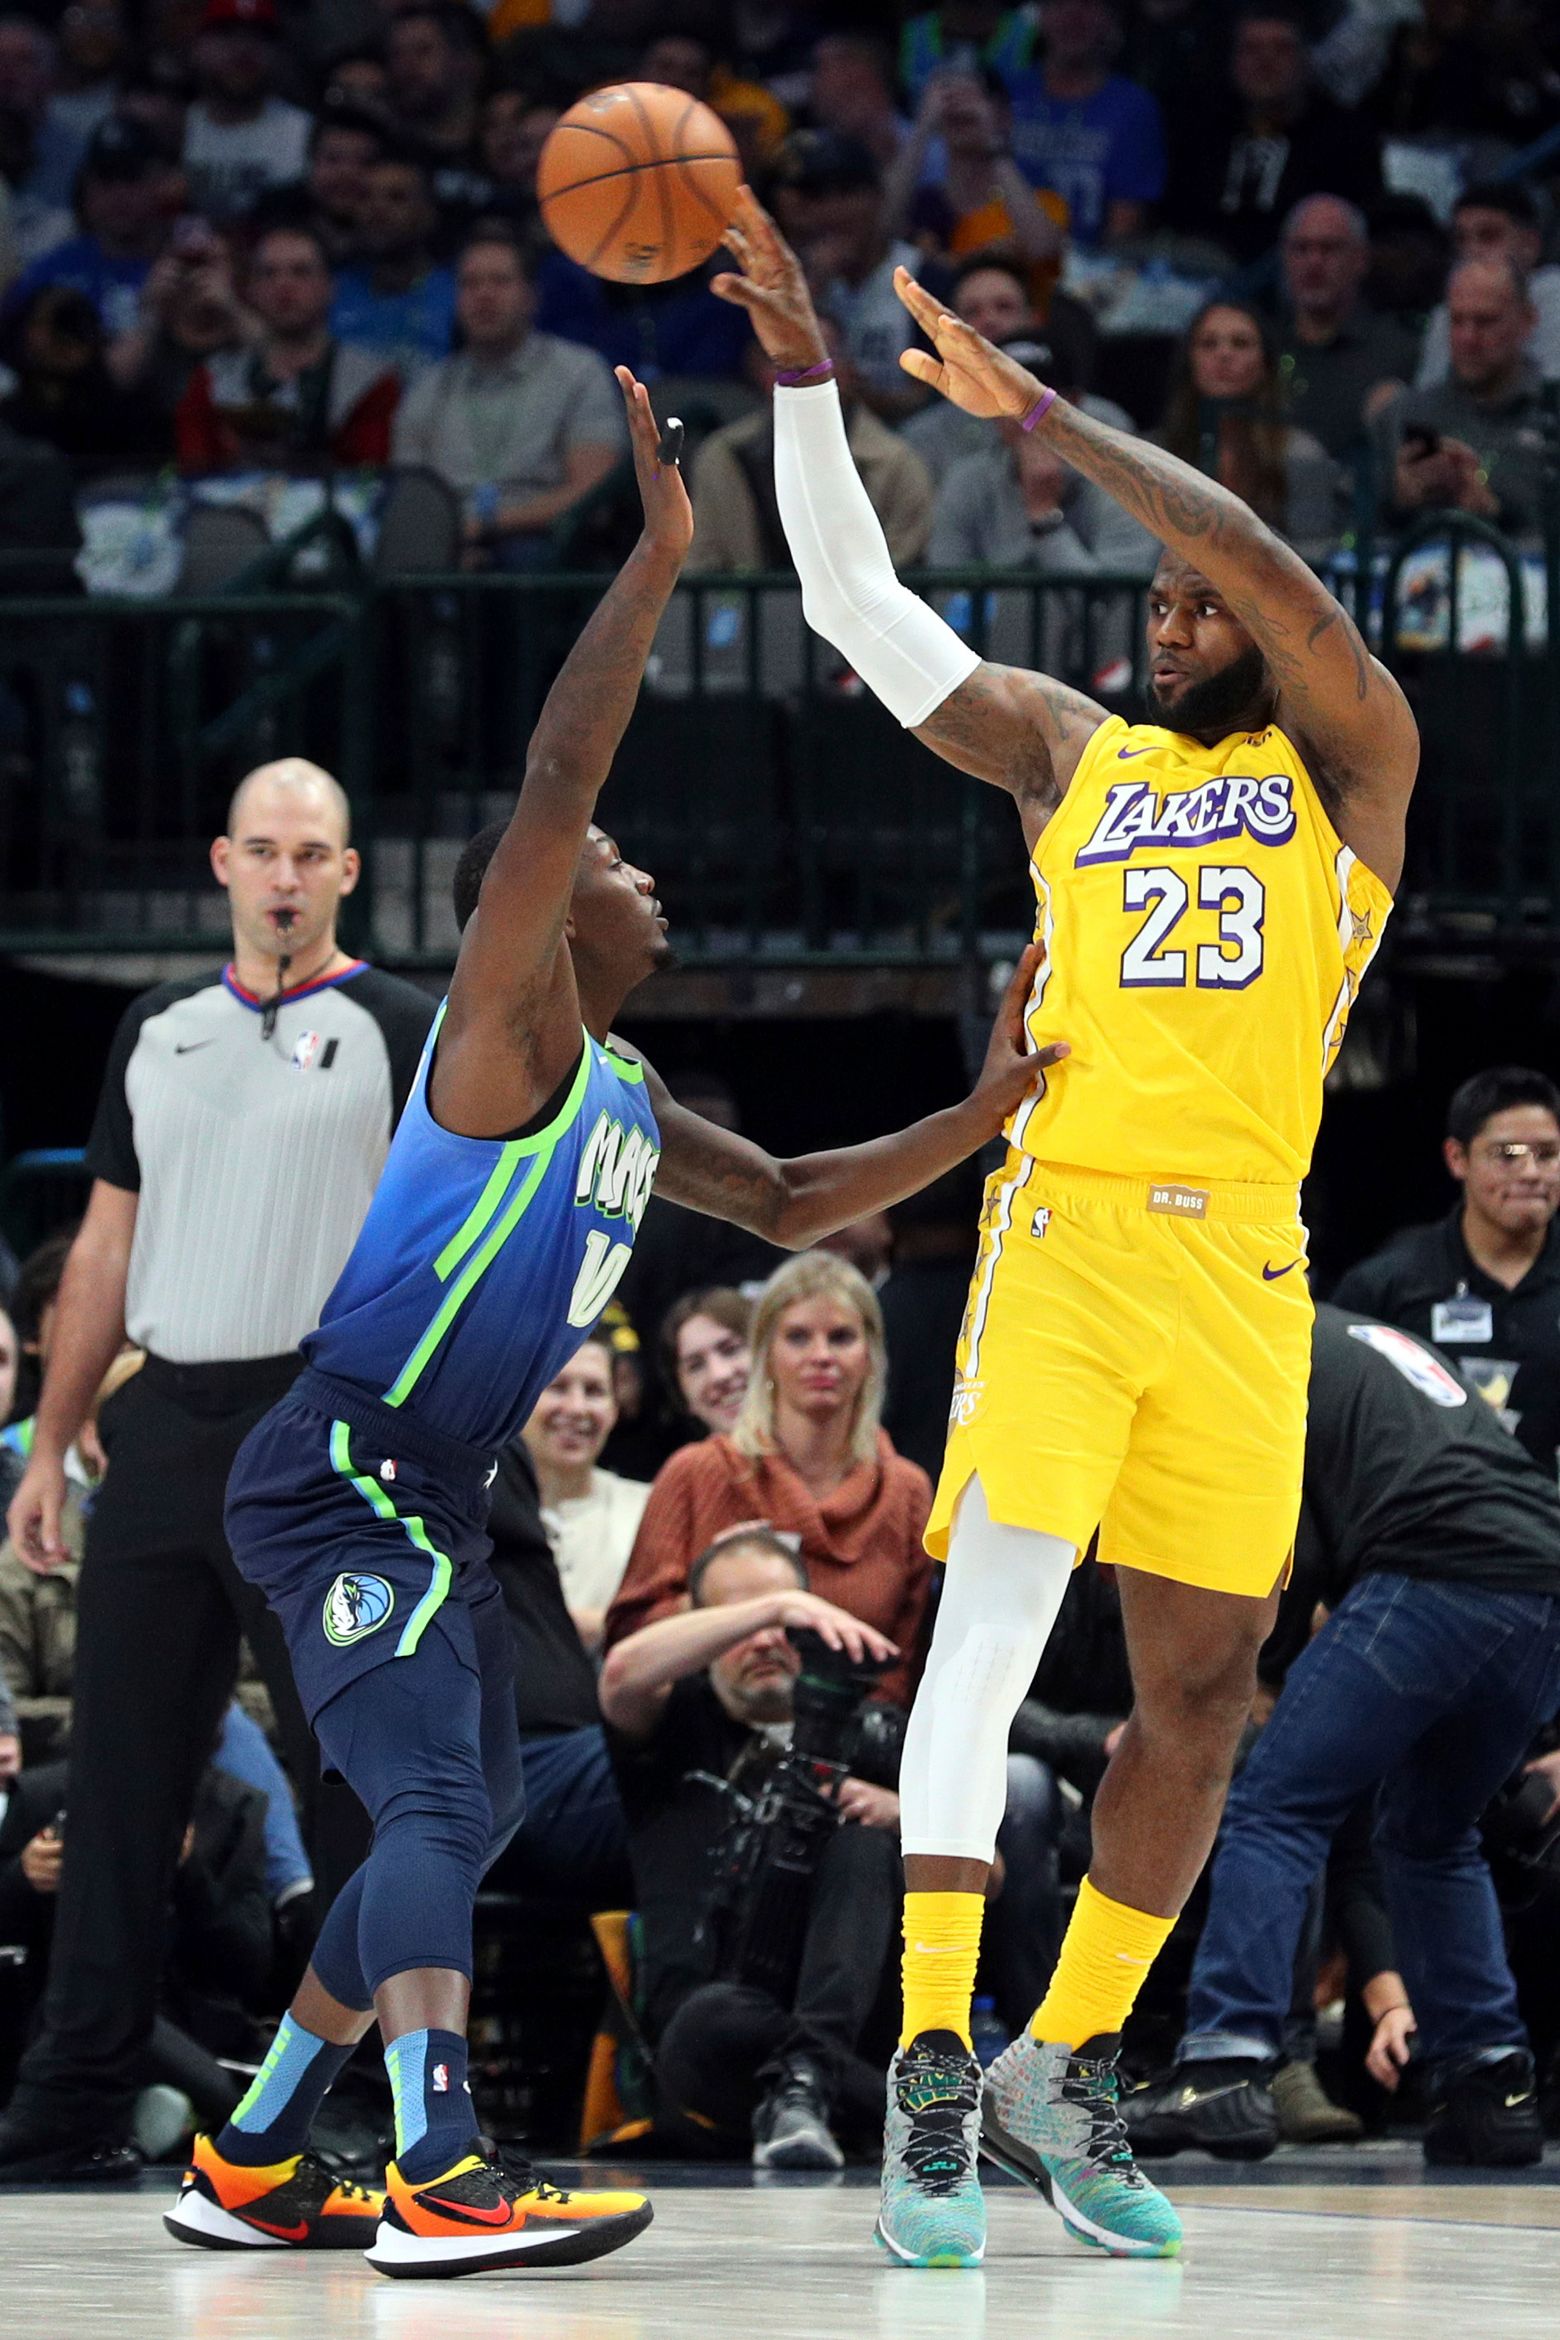 Lakers overcome 27-point deficit to defeat Mavericks, complete